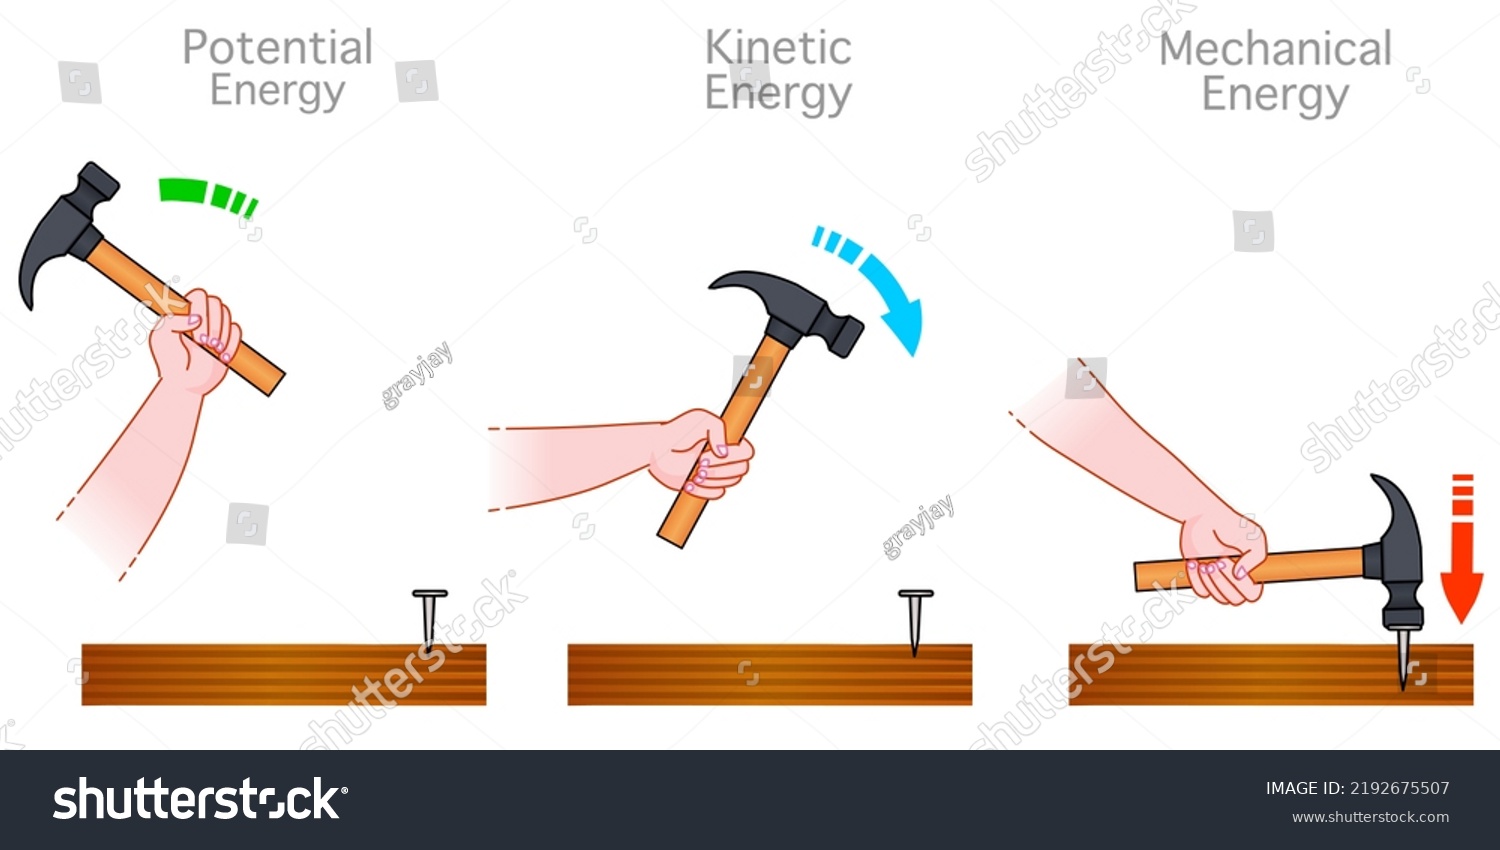 Potential, kinetic energy. Two main types of mechanical energy are motion and stored energy. Hammering nails into wood energy transformation. Physics example. illustration vector #2192675507